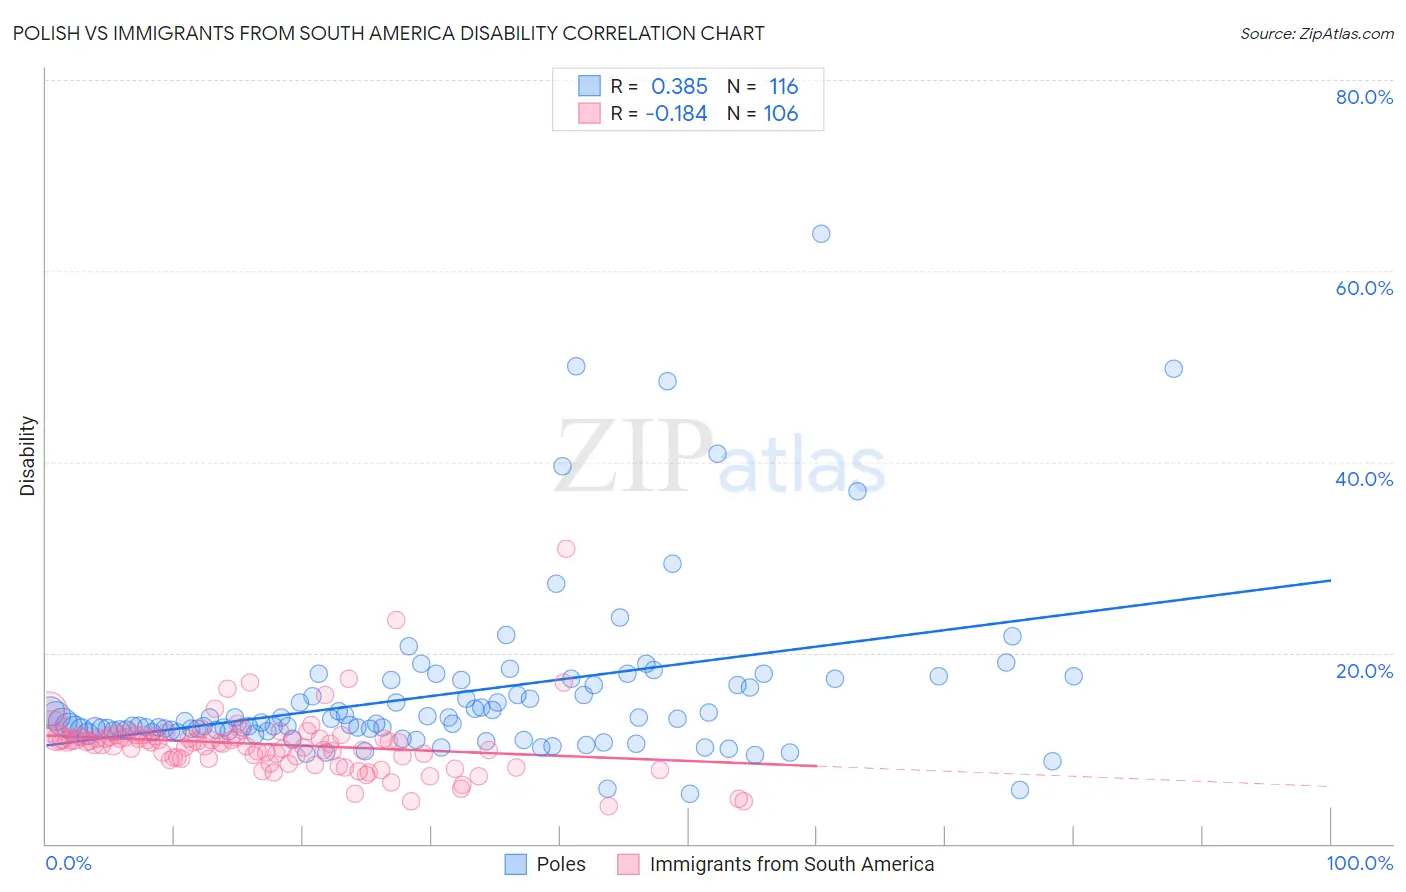 Polish vs Immigrants from South America Disability